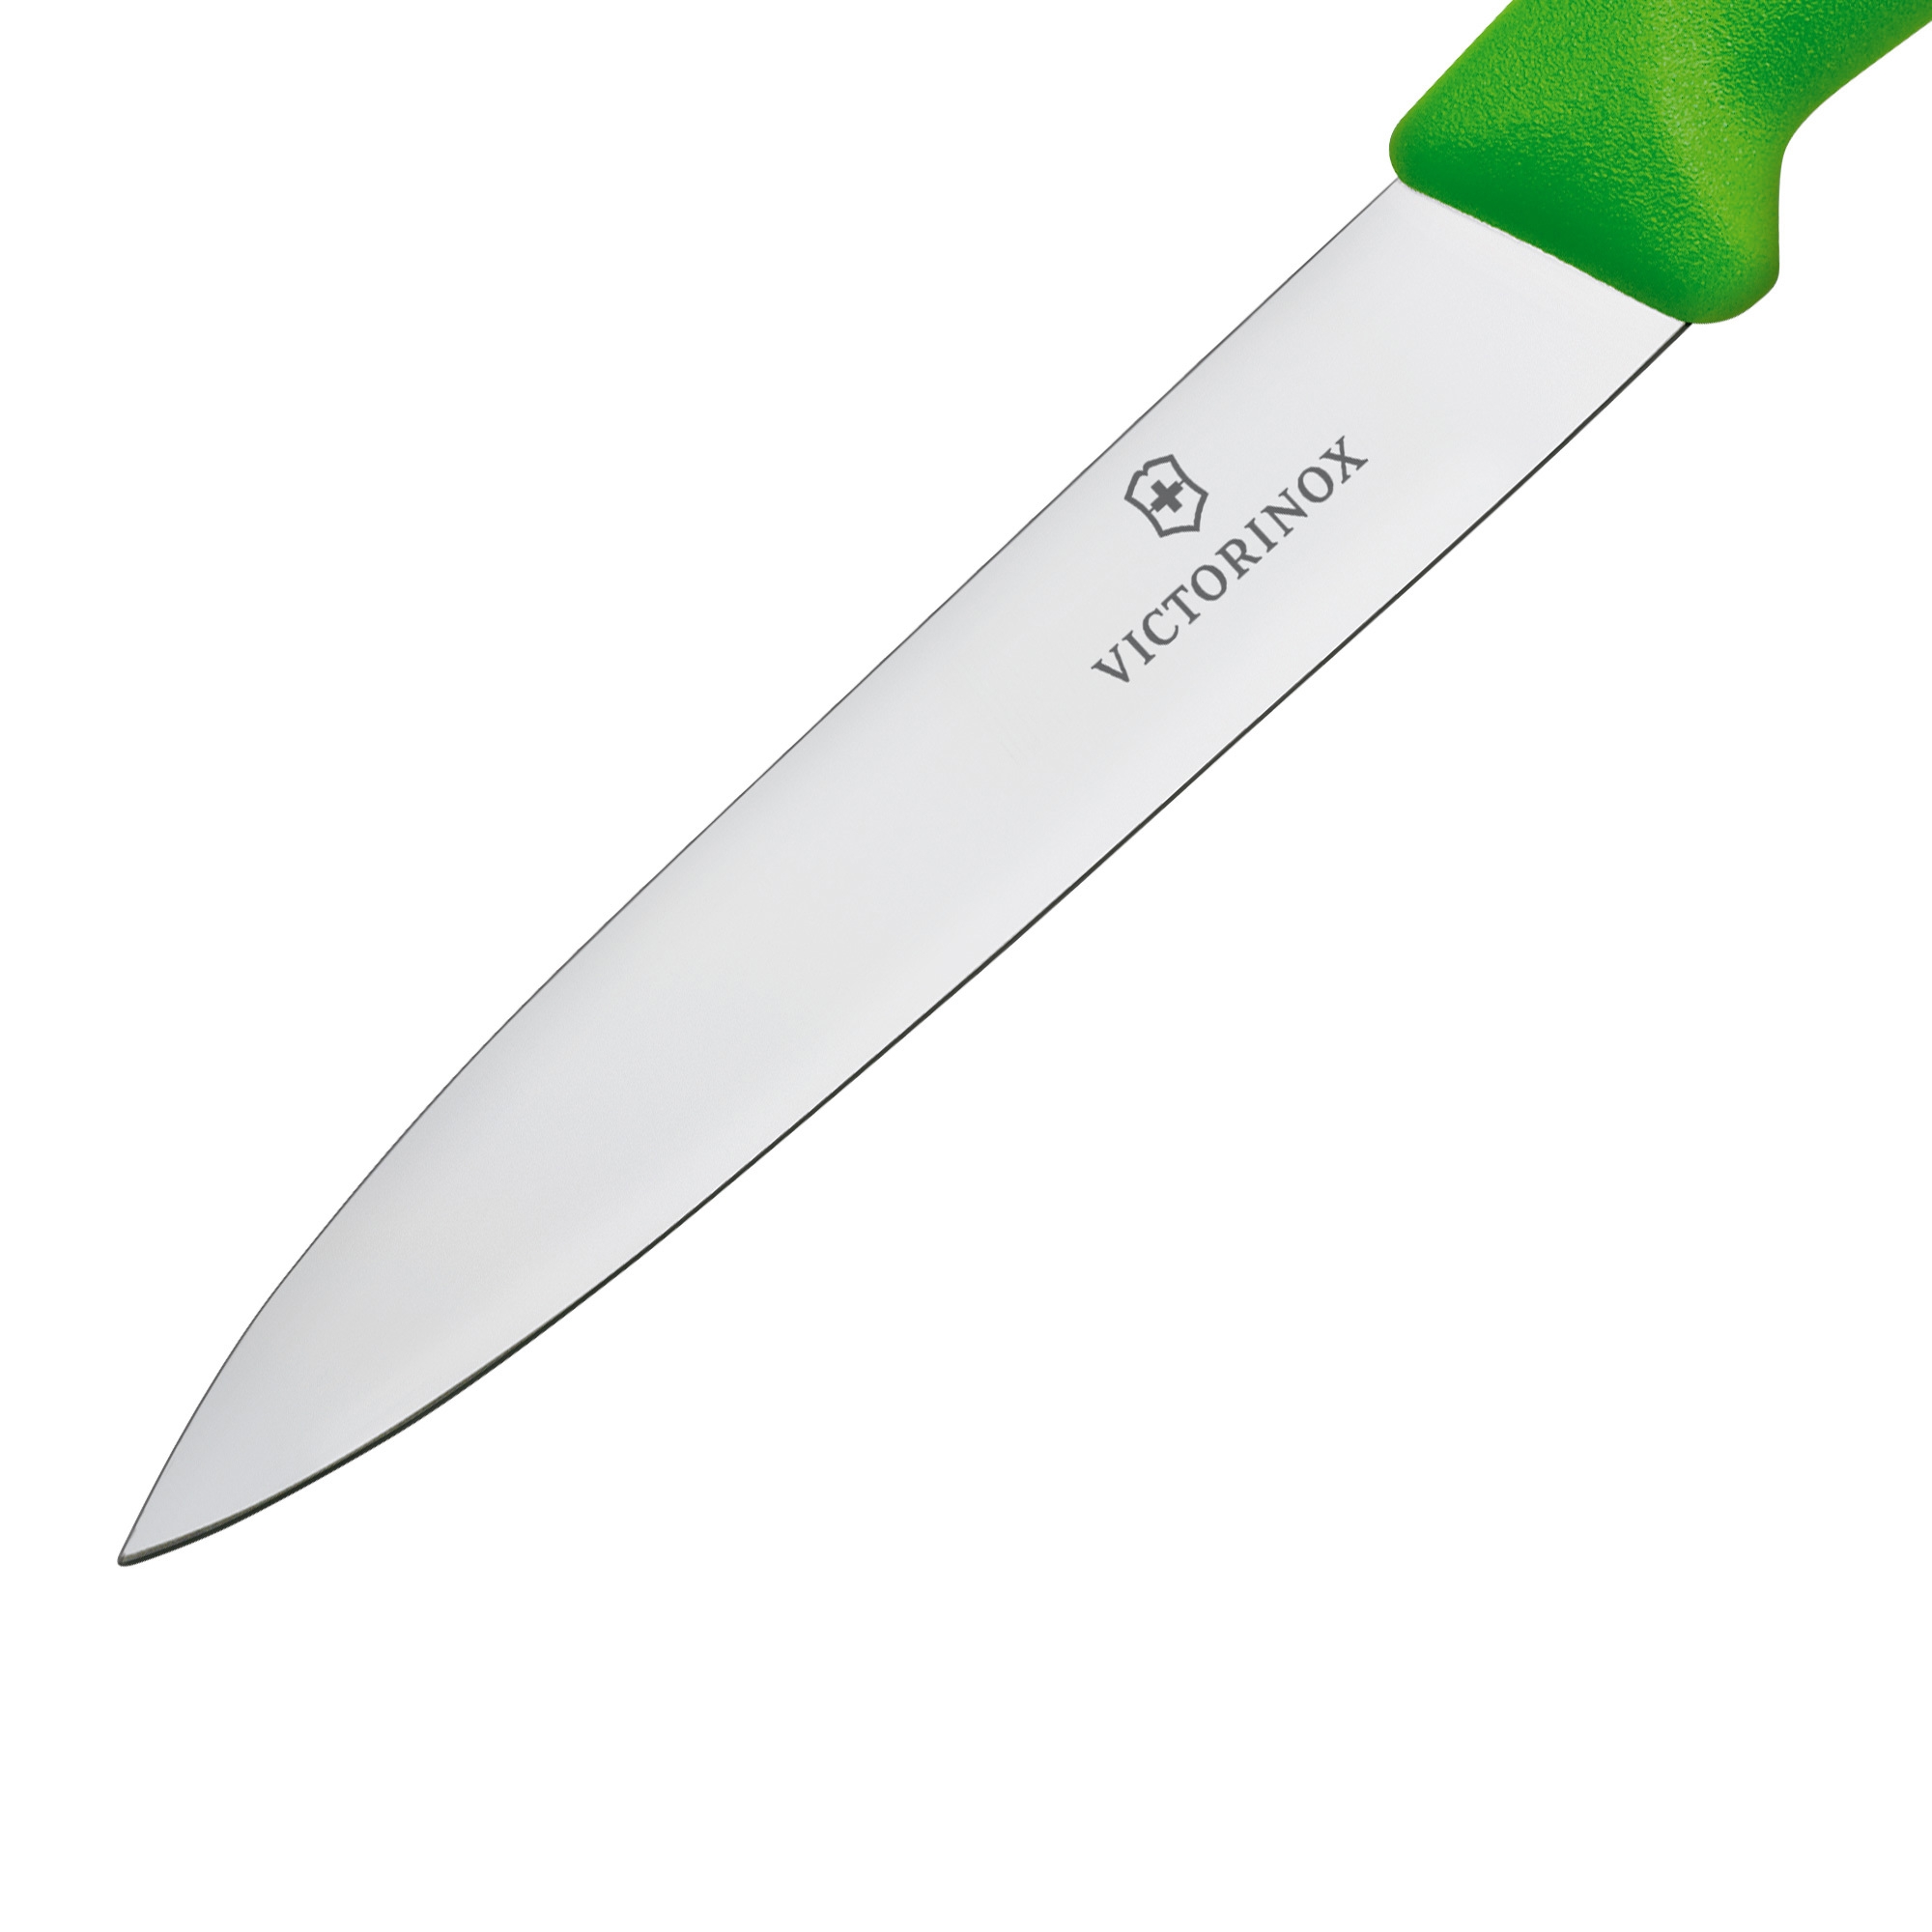 Victorinox Swiss Classic Pointed Tip Vegetable Knife 10cm Green Image 2